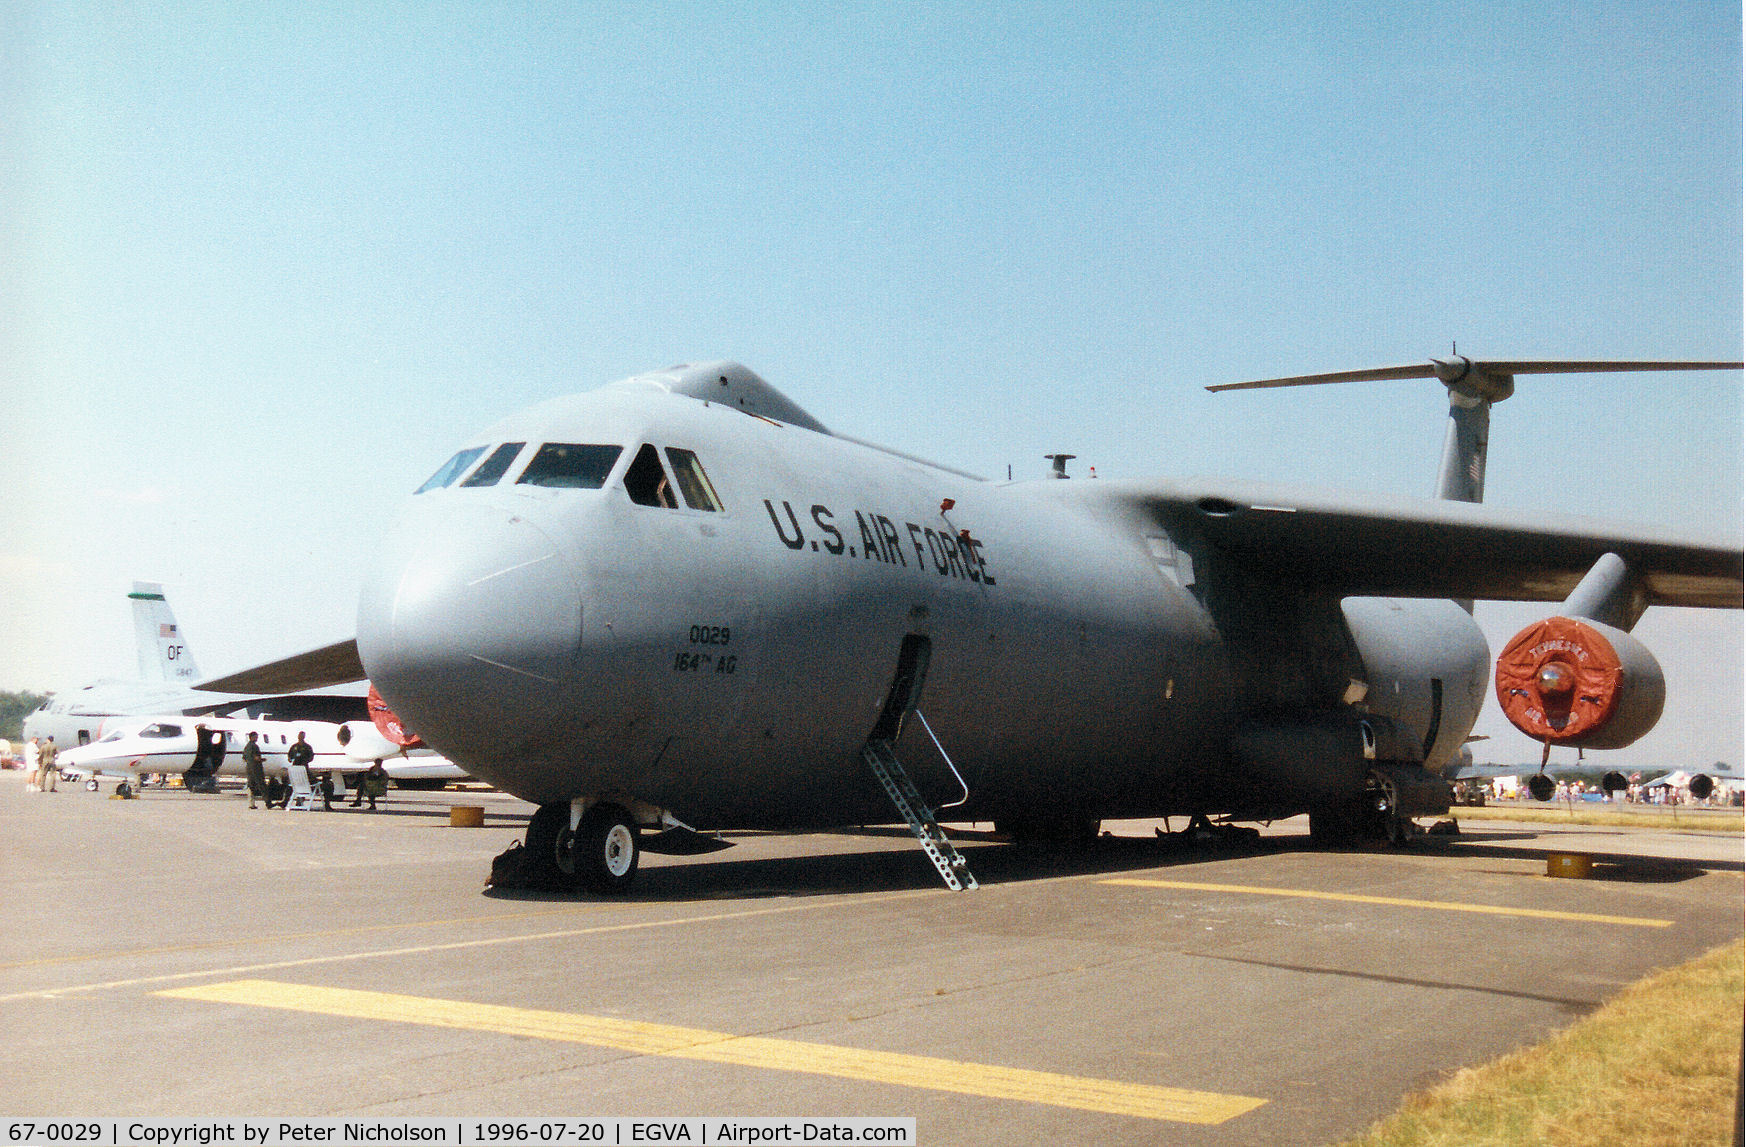 67-0029, 1967 Lockheed C-141B Starlifter C/N 300-6280, Another view of the Tennessee Air National Guard C-141B Starlifter on display at the 1996 Royal Intnl Air Tattoo at RAF Fairford.